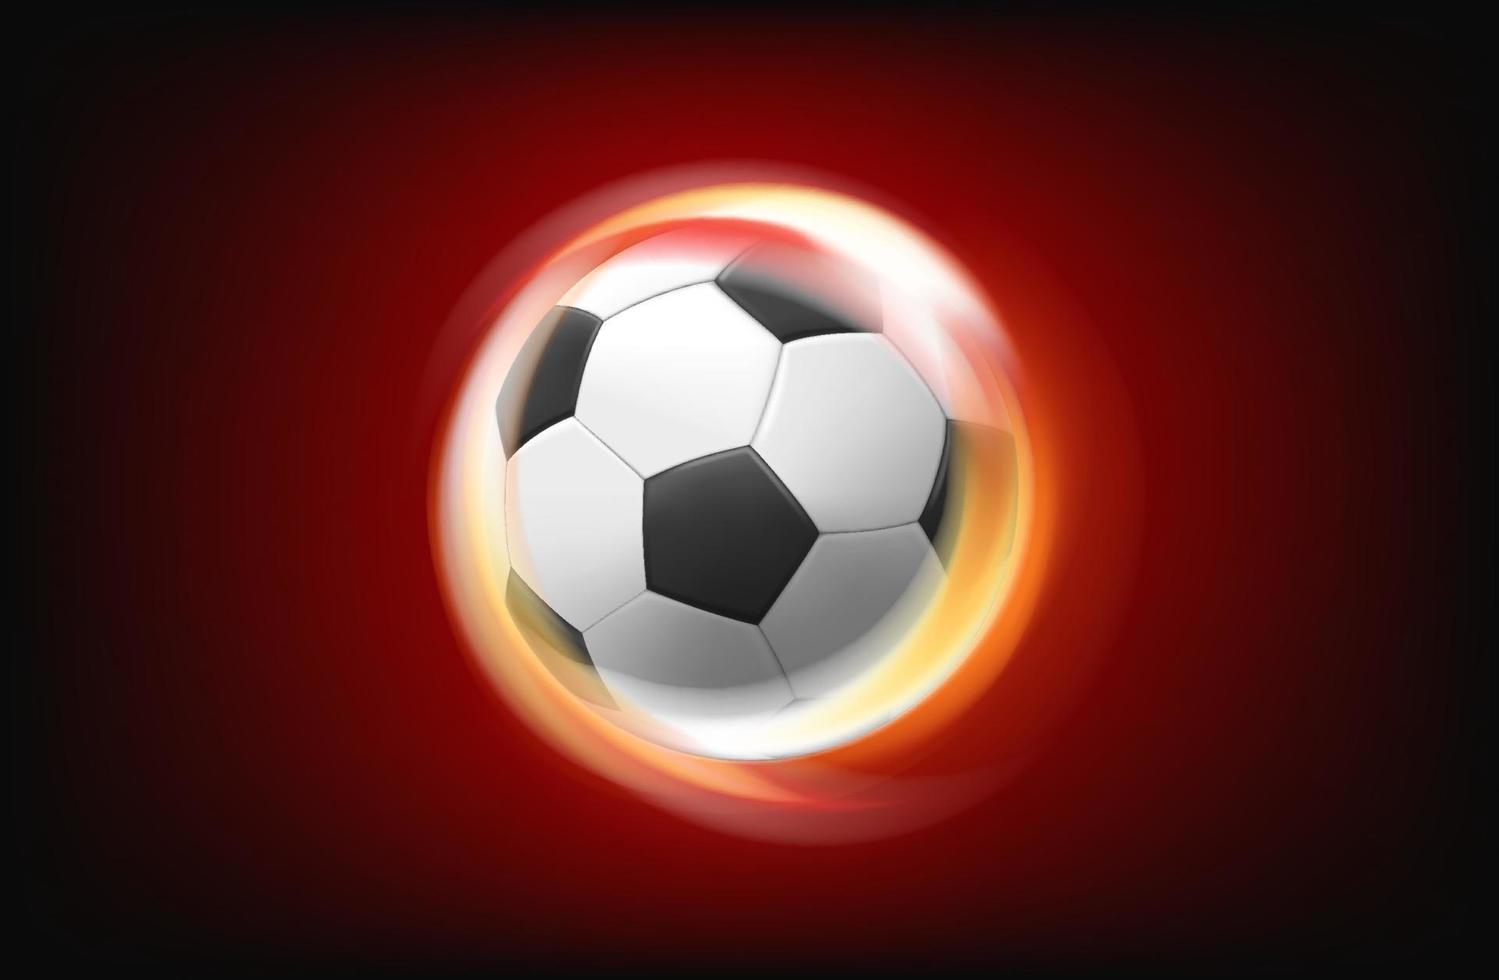 Spinning flaming soccer ball. 3d vector illustration with fire effect